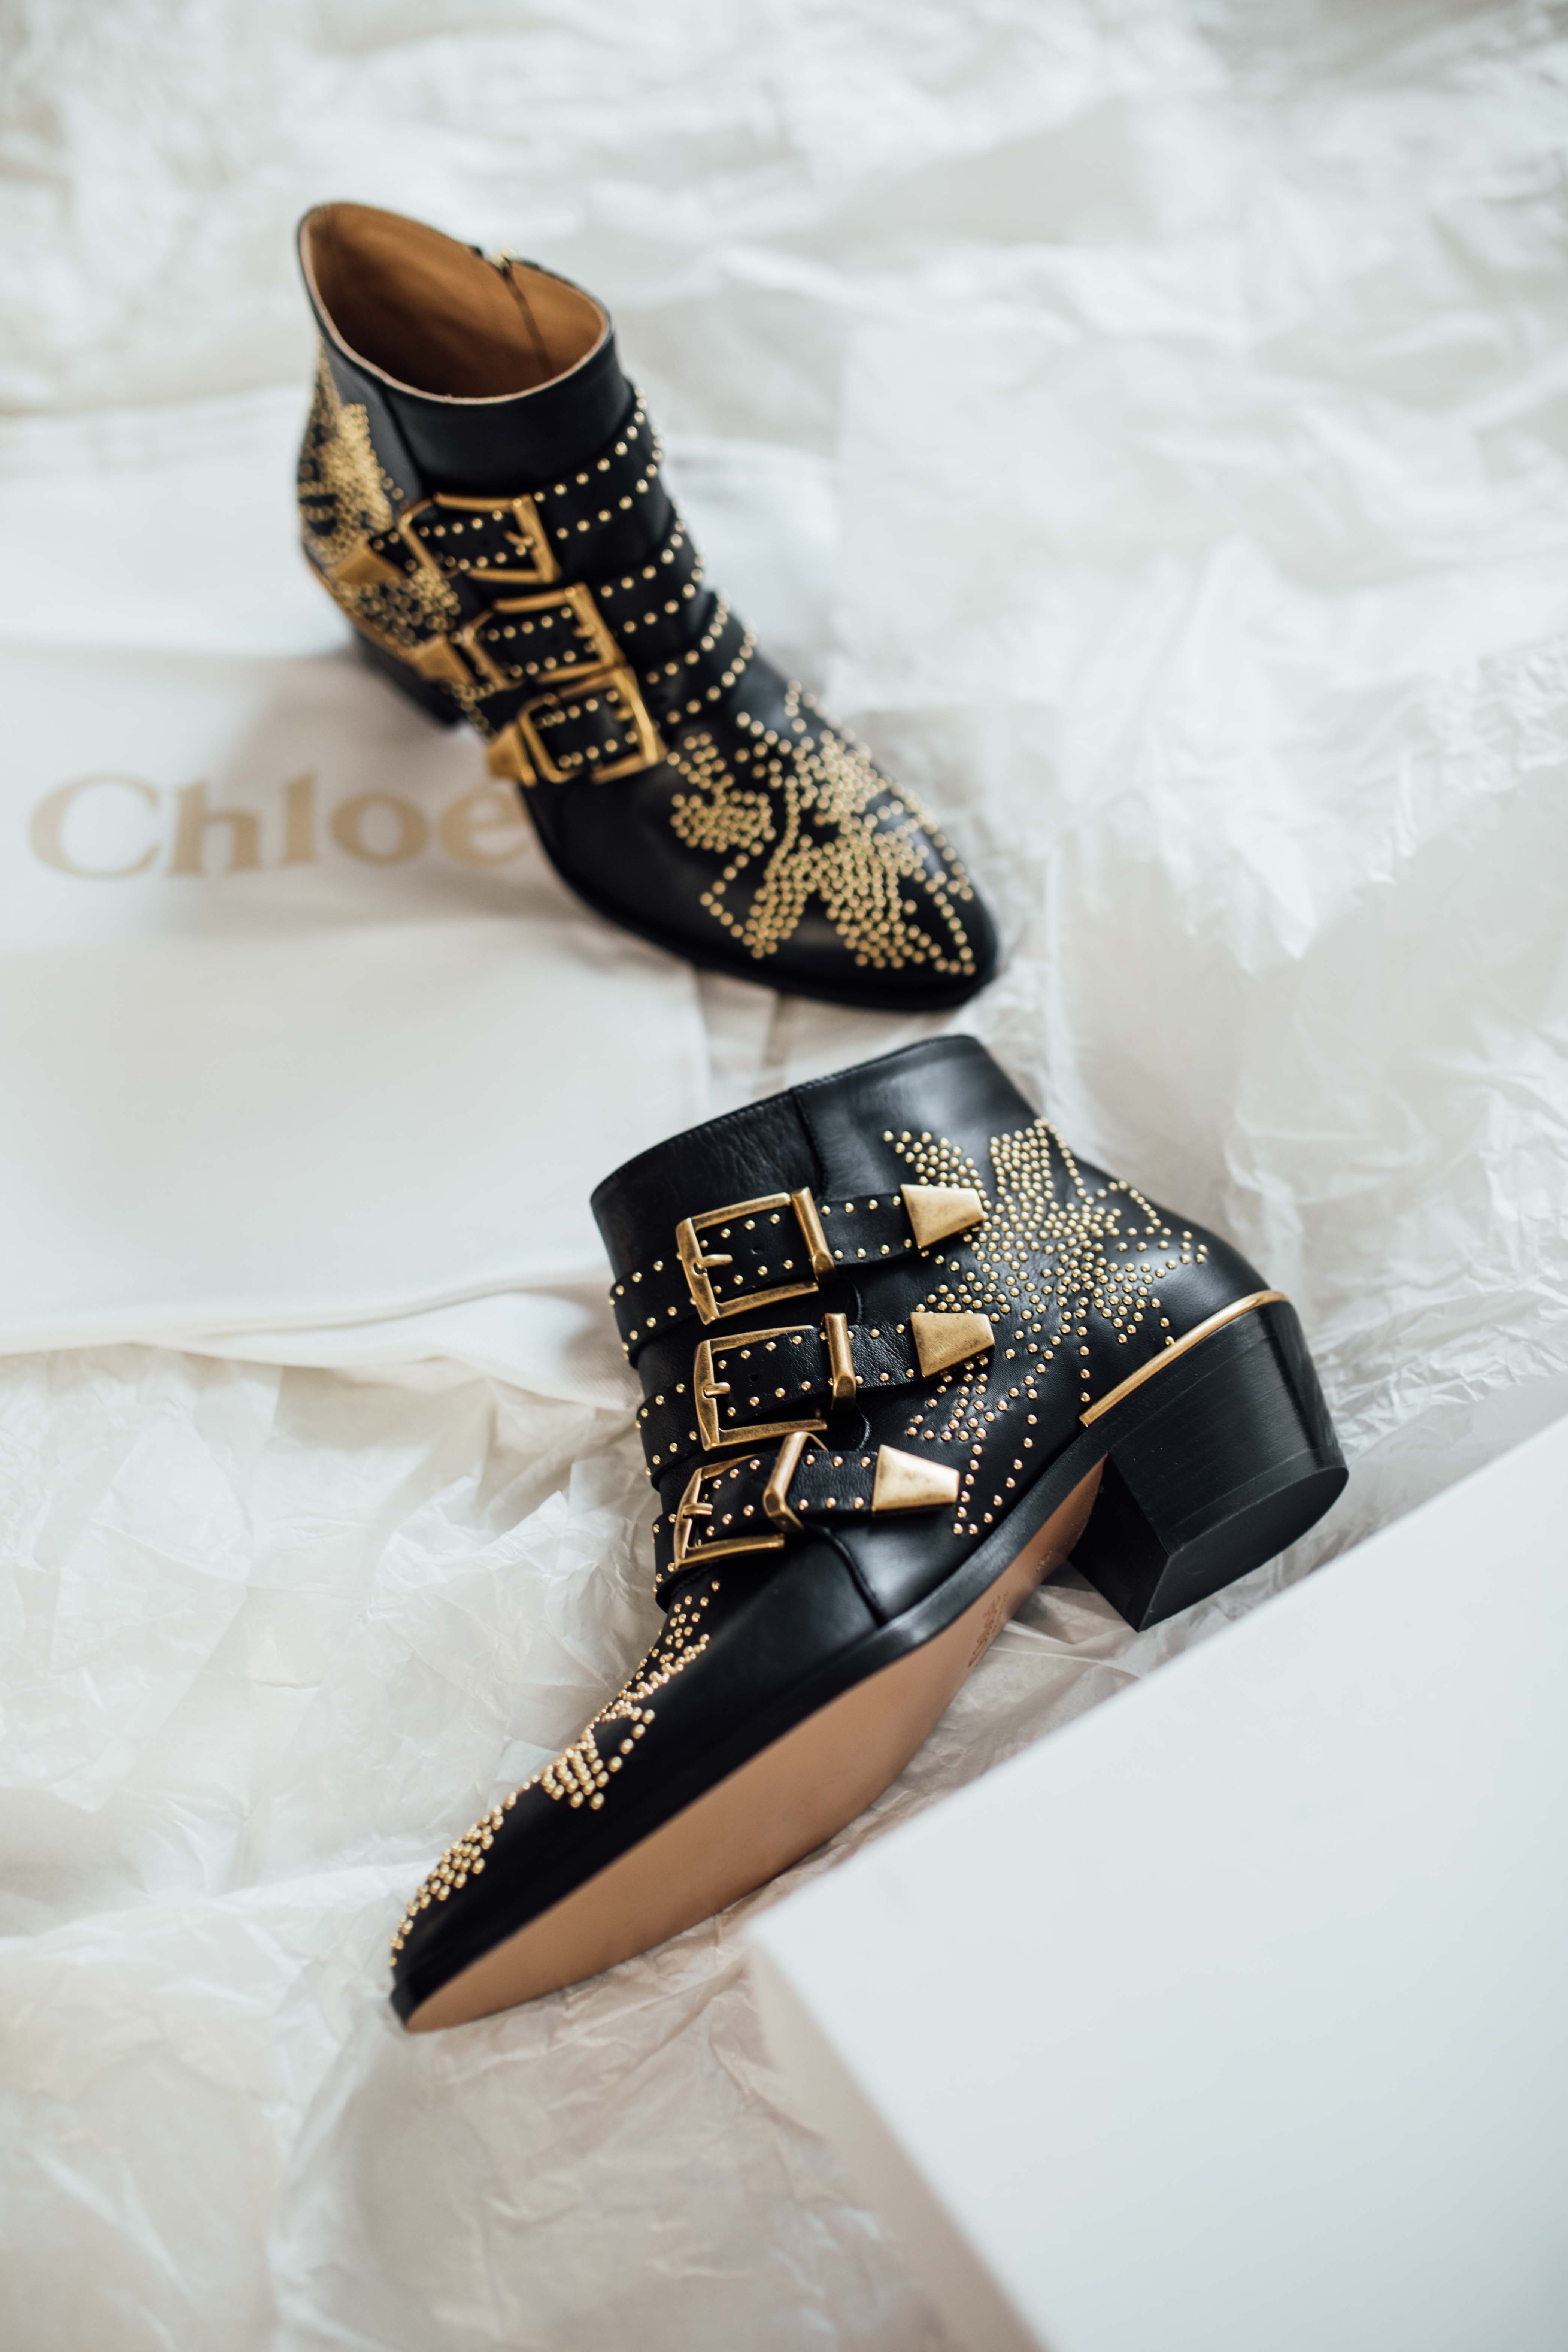 New In: Chloé Susanna Boots | You rock my life